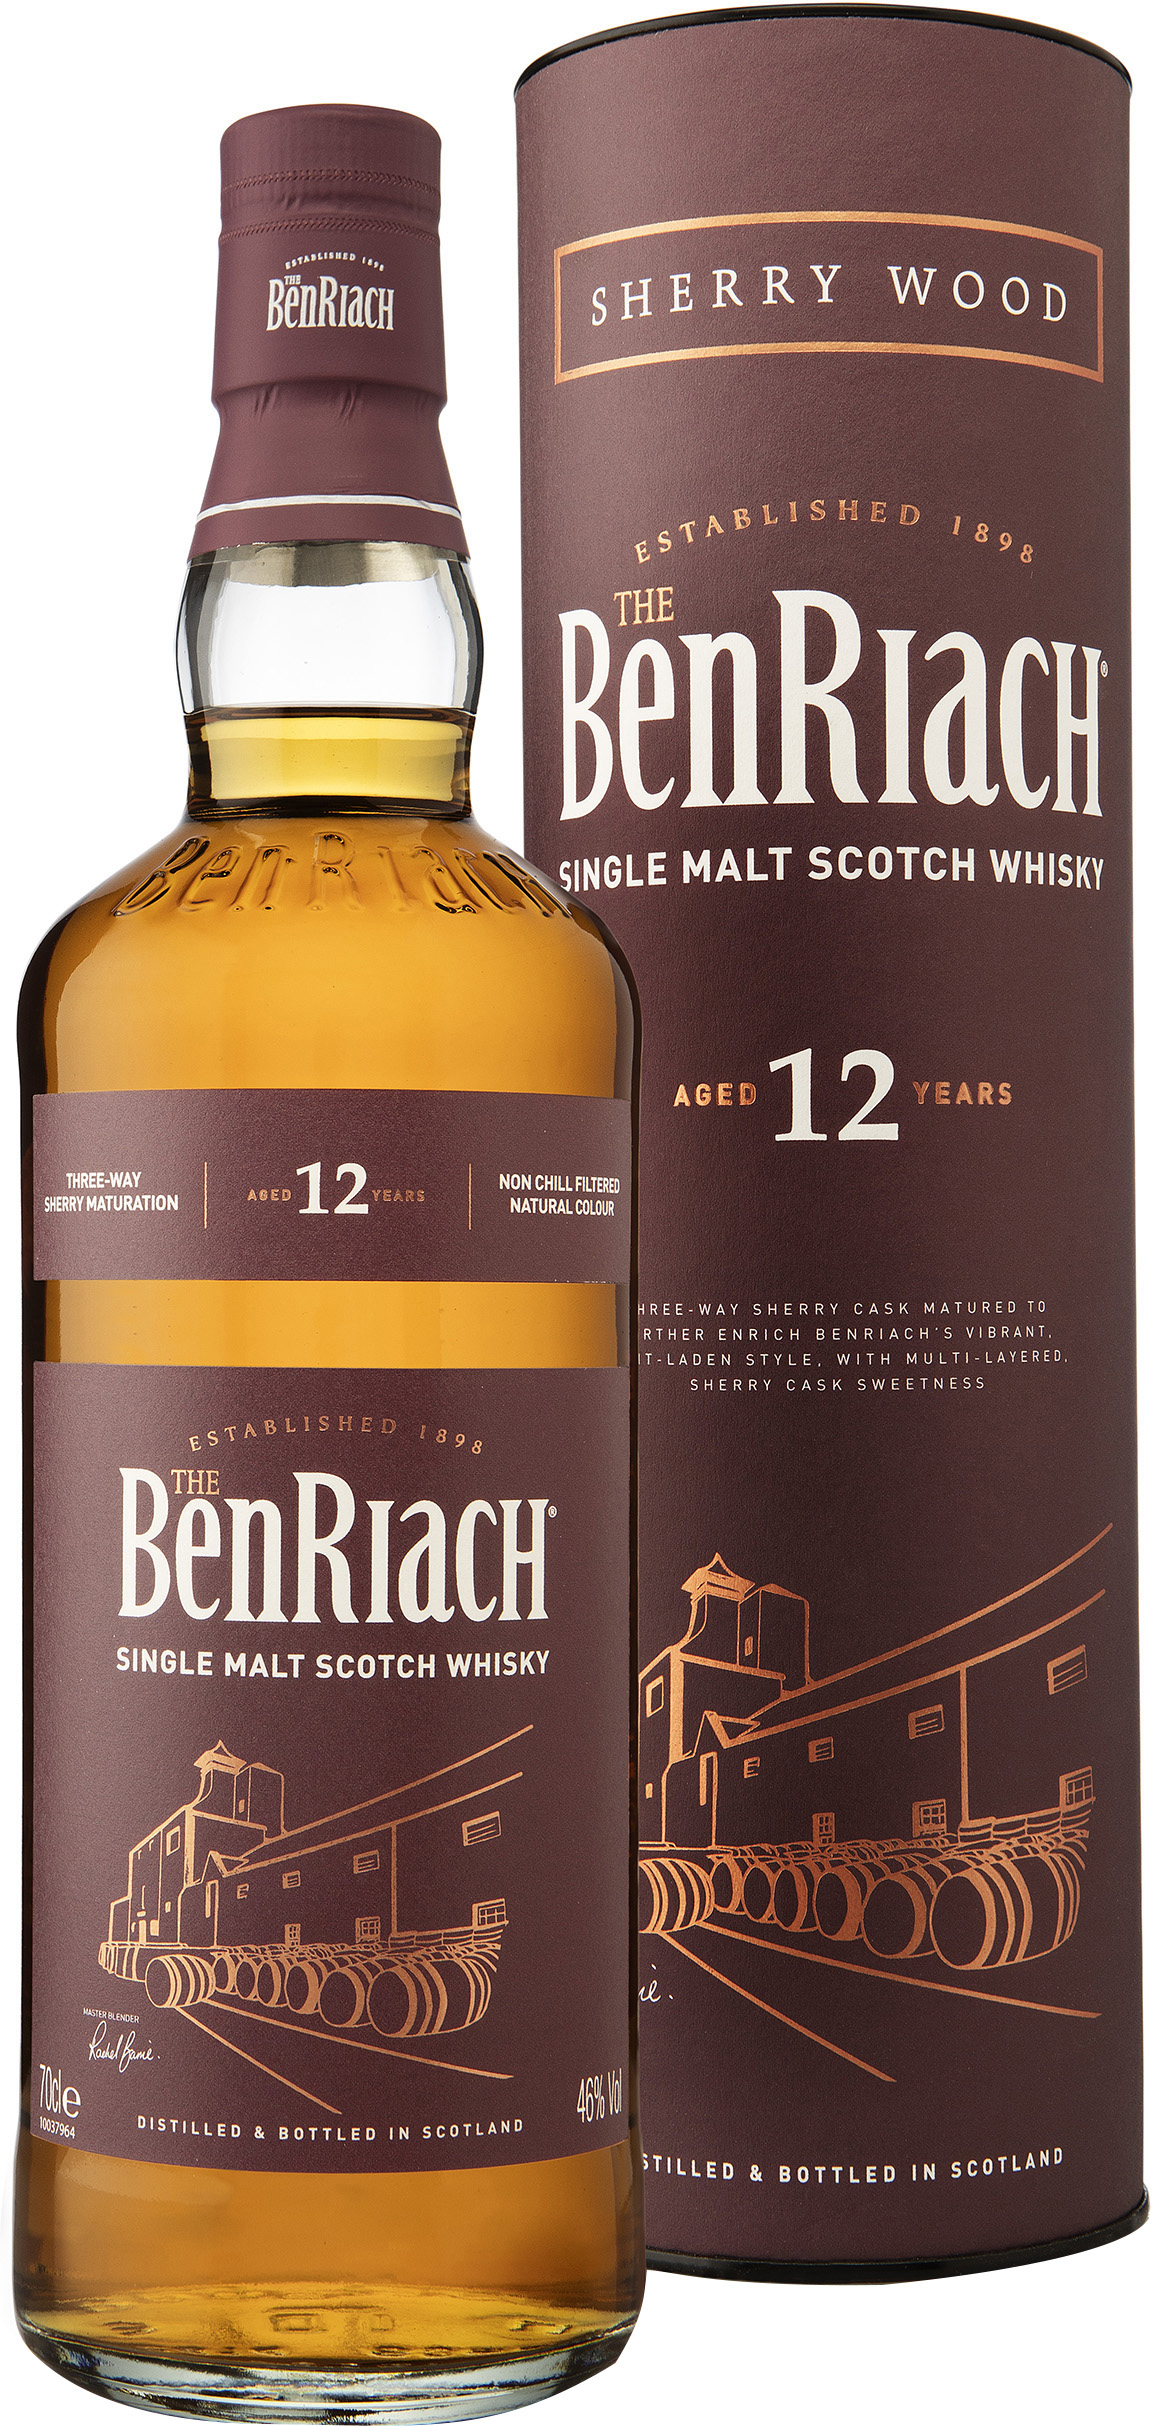 The BenRiach Sherry Wood Matured 12 Year Old Single Malt